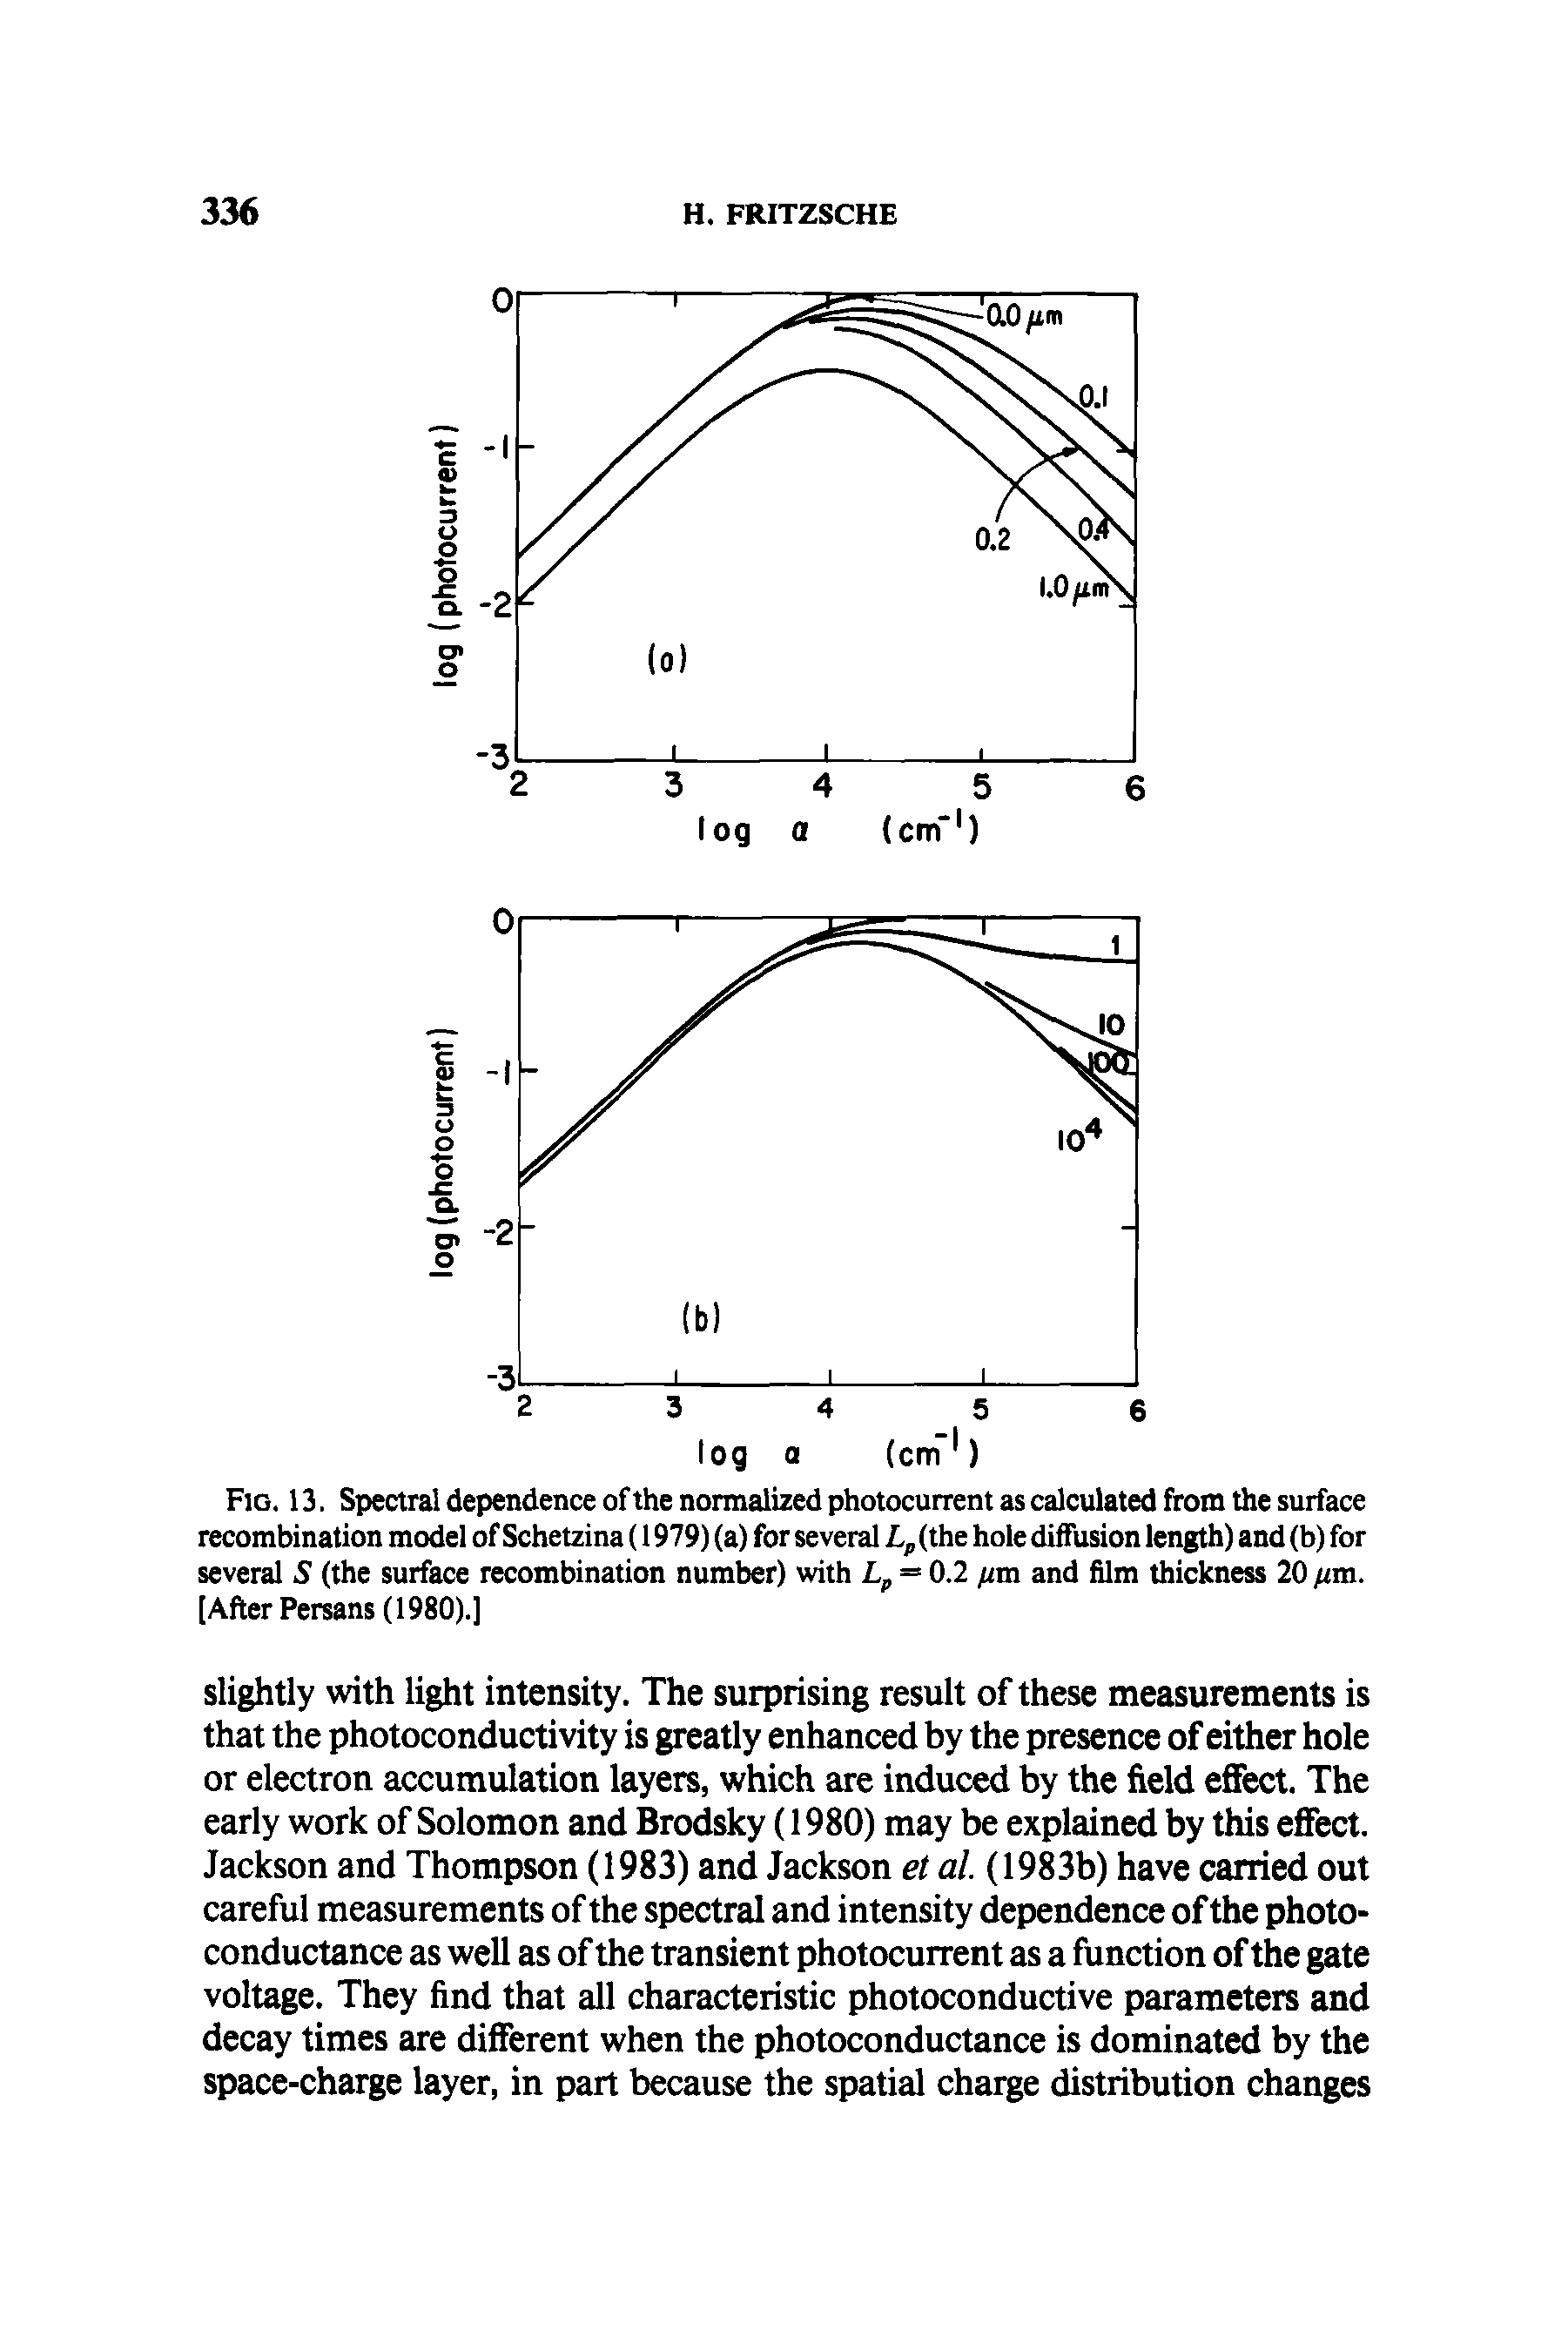 Fig. 13. Spectral dependence of the normalized photocurrent as calculated from the surface recombination model of Schetzina (1979) (a) for several L, (the hole diffusion length) and (b) for several S (the surface recombination number) with 0.2 fira and film thickness 20 nm. [After Persans (1980).]...